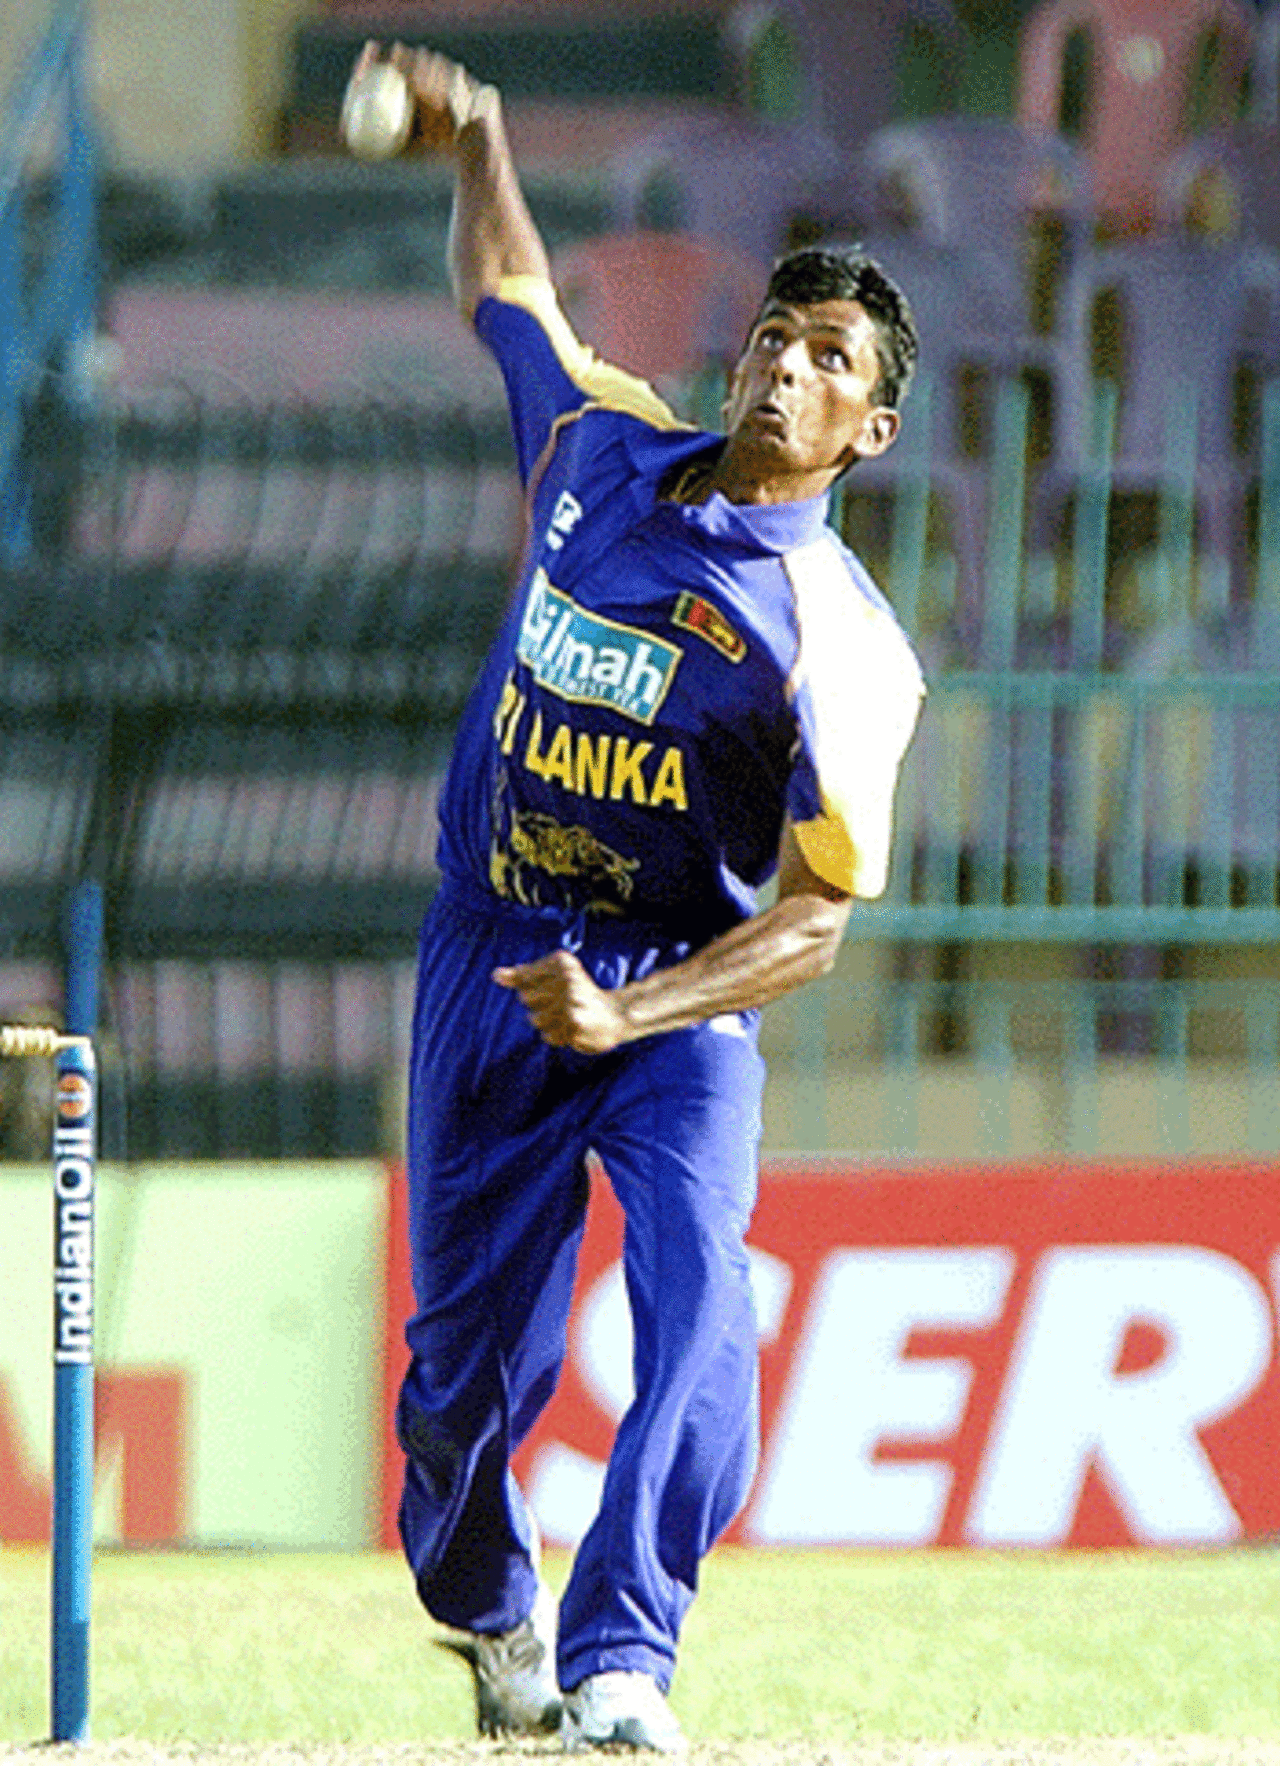 Upul Chandana in action, Sri Lanka v West Indies, Indian Oil Cup, Premadasa Stadium, Colombo, August 6, 2005